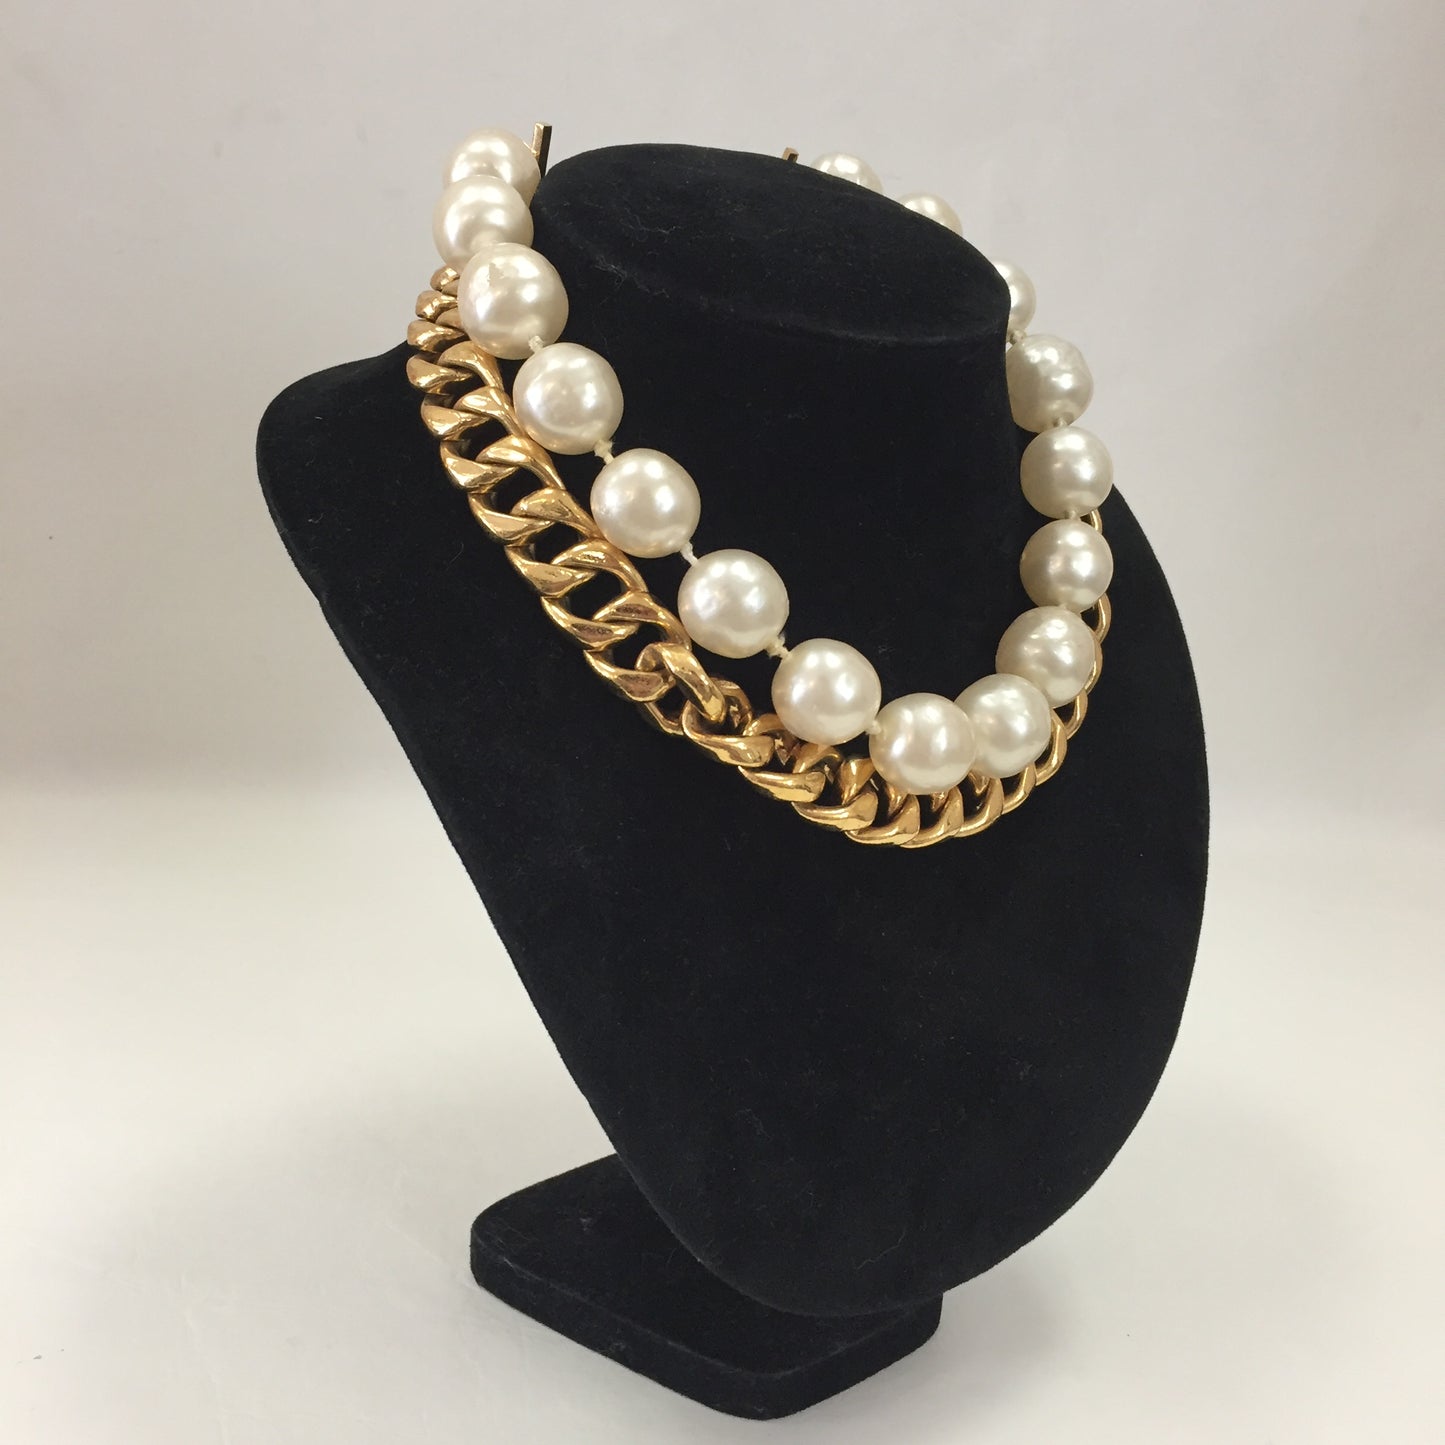 Authentic Chanel Jumbo Pearl/Gold Chain Necklace